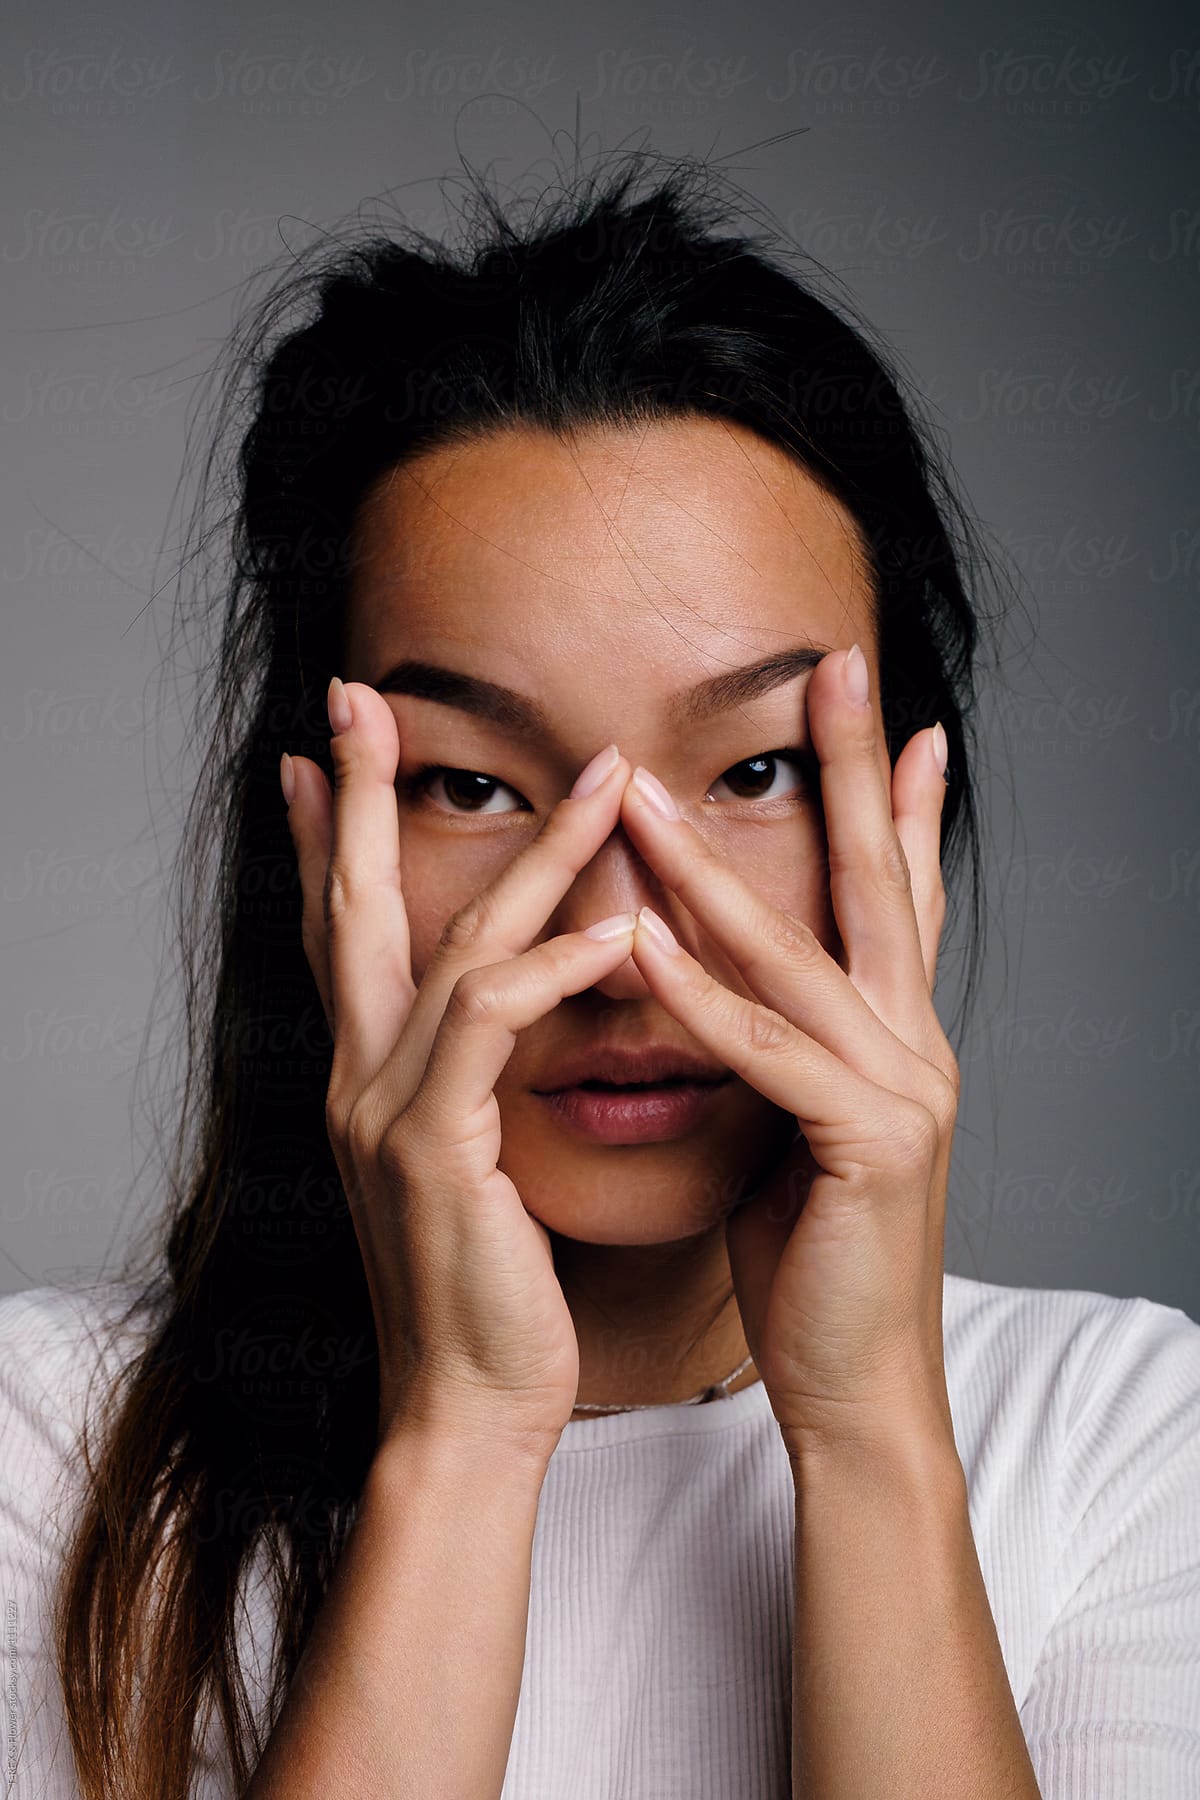 Asian Model With Hands On Face By Danil Nevsky